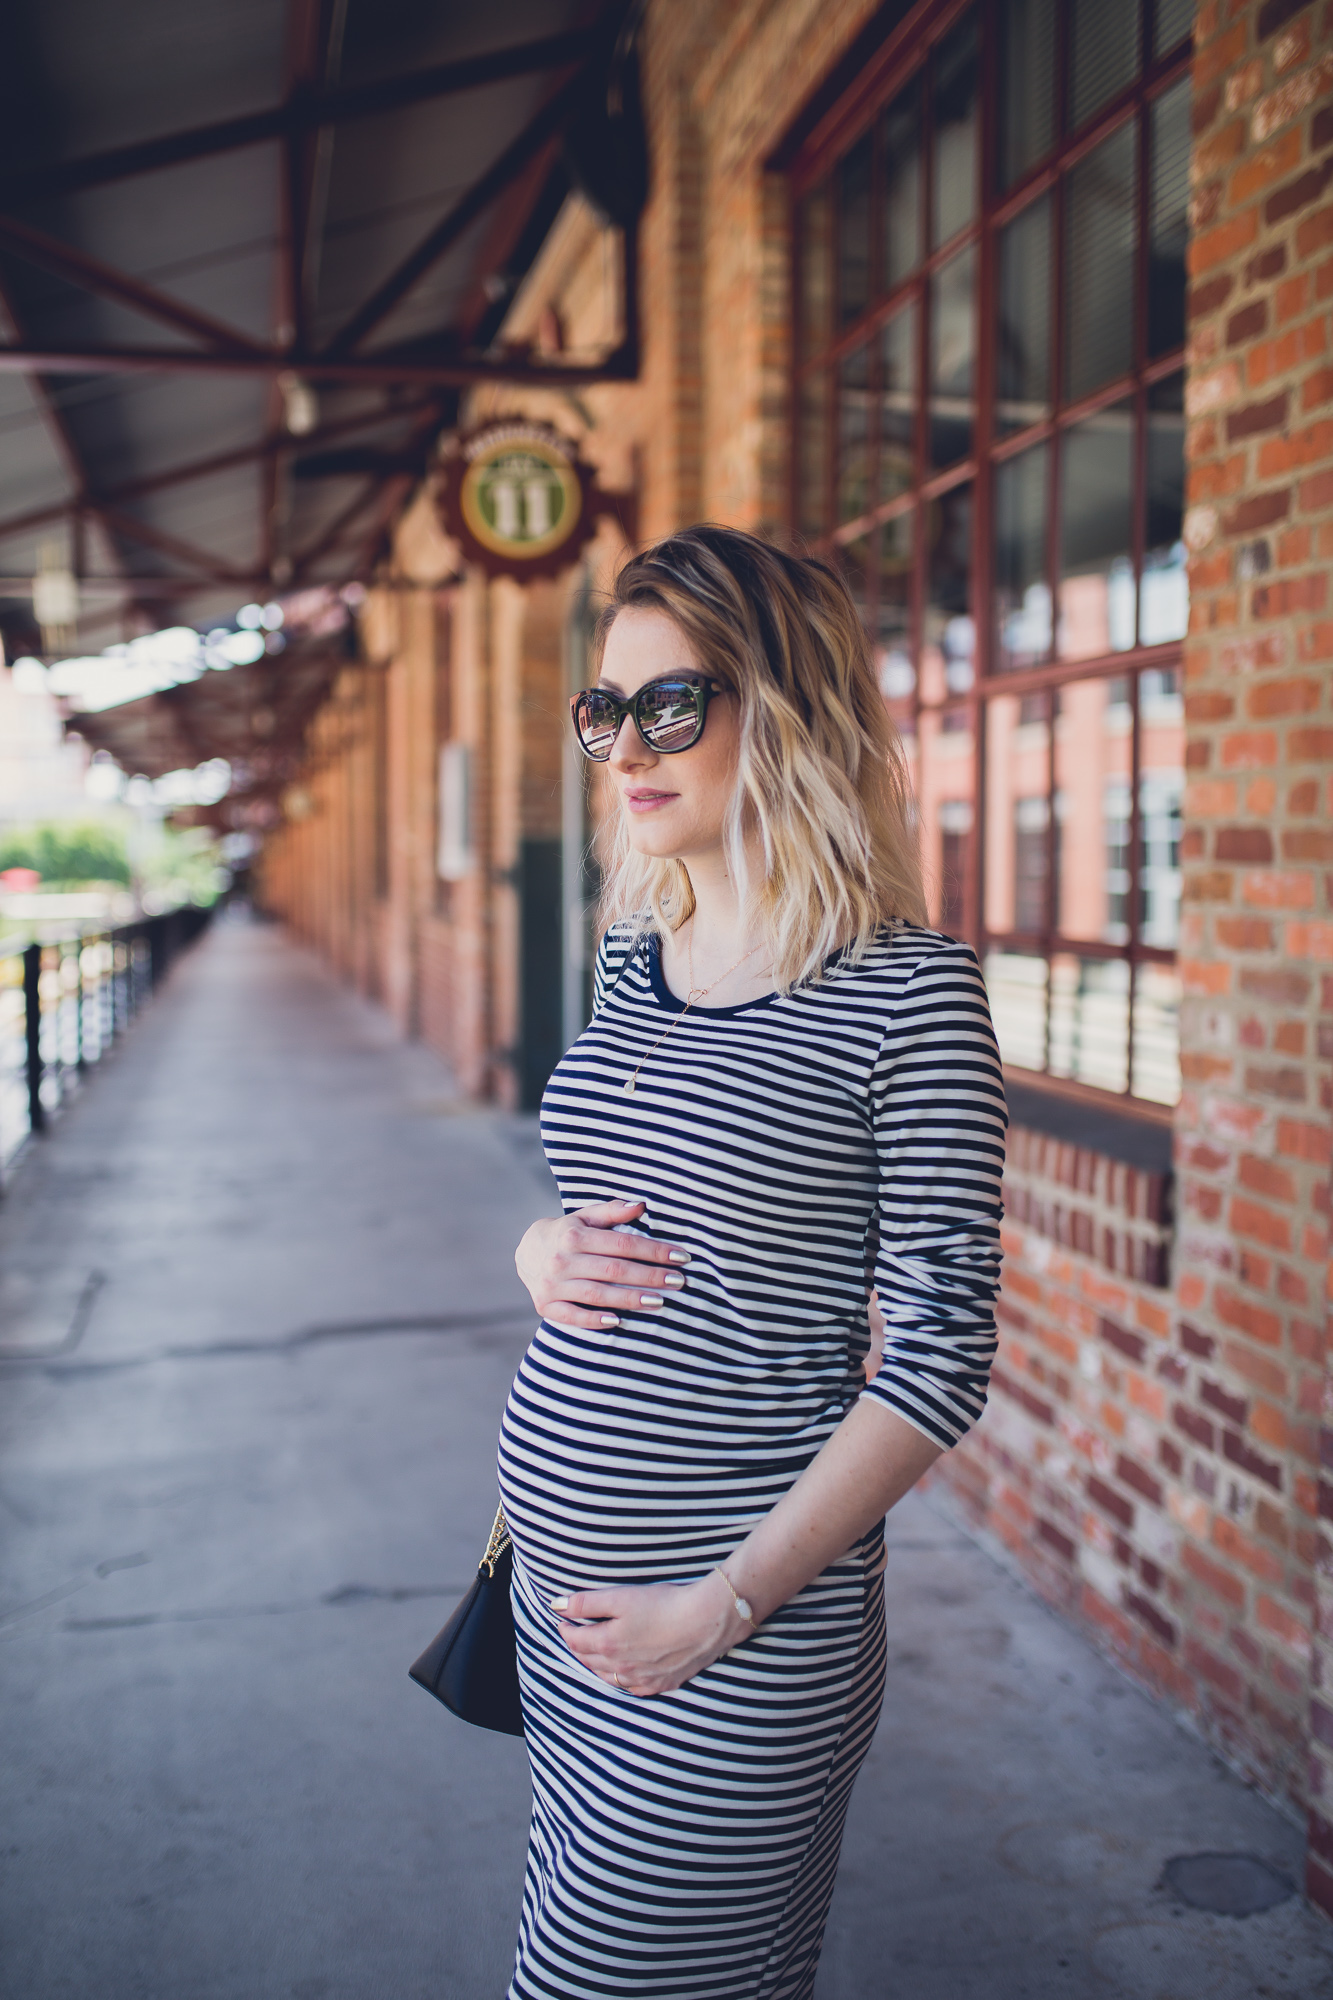 Lifestyle, fashion, and beauty blogger and vlogger Jessica Linn sharing latest Instagram Posts and maternity style outfit inspiration